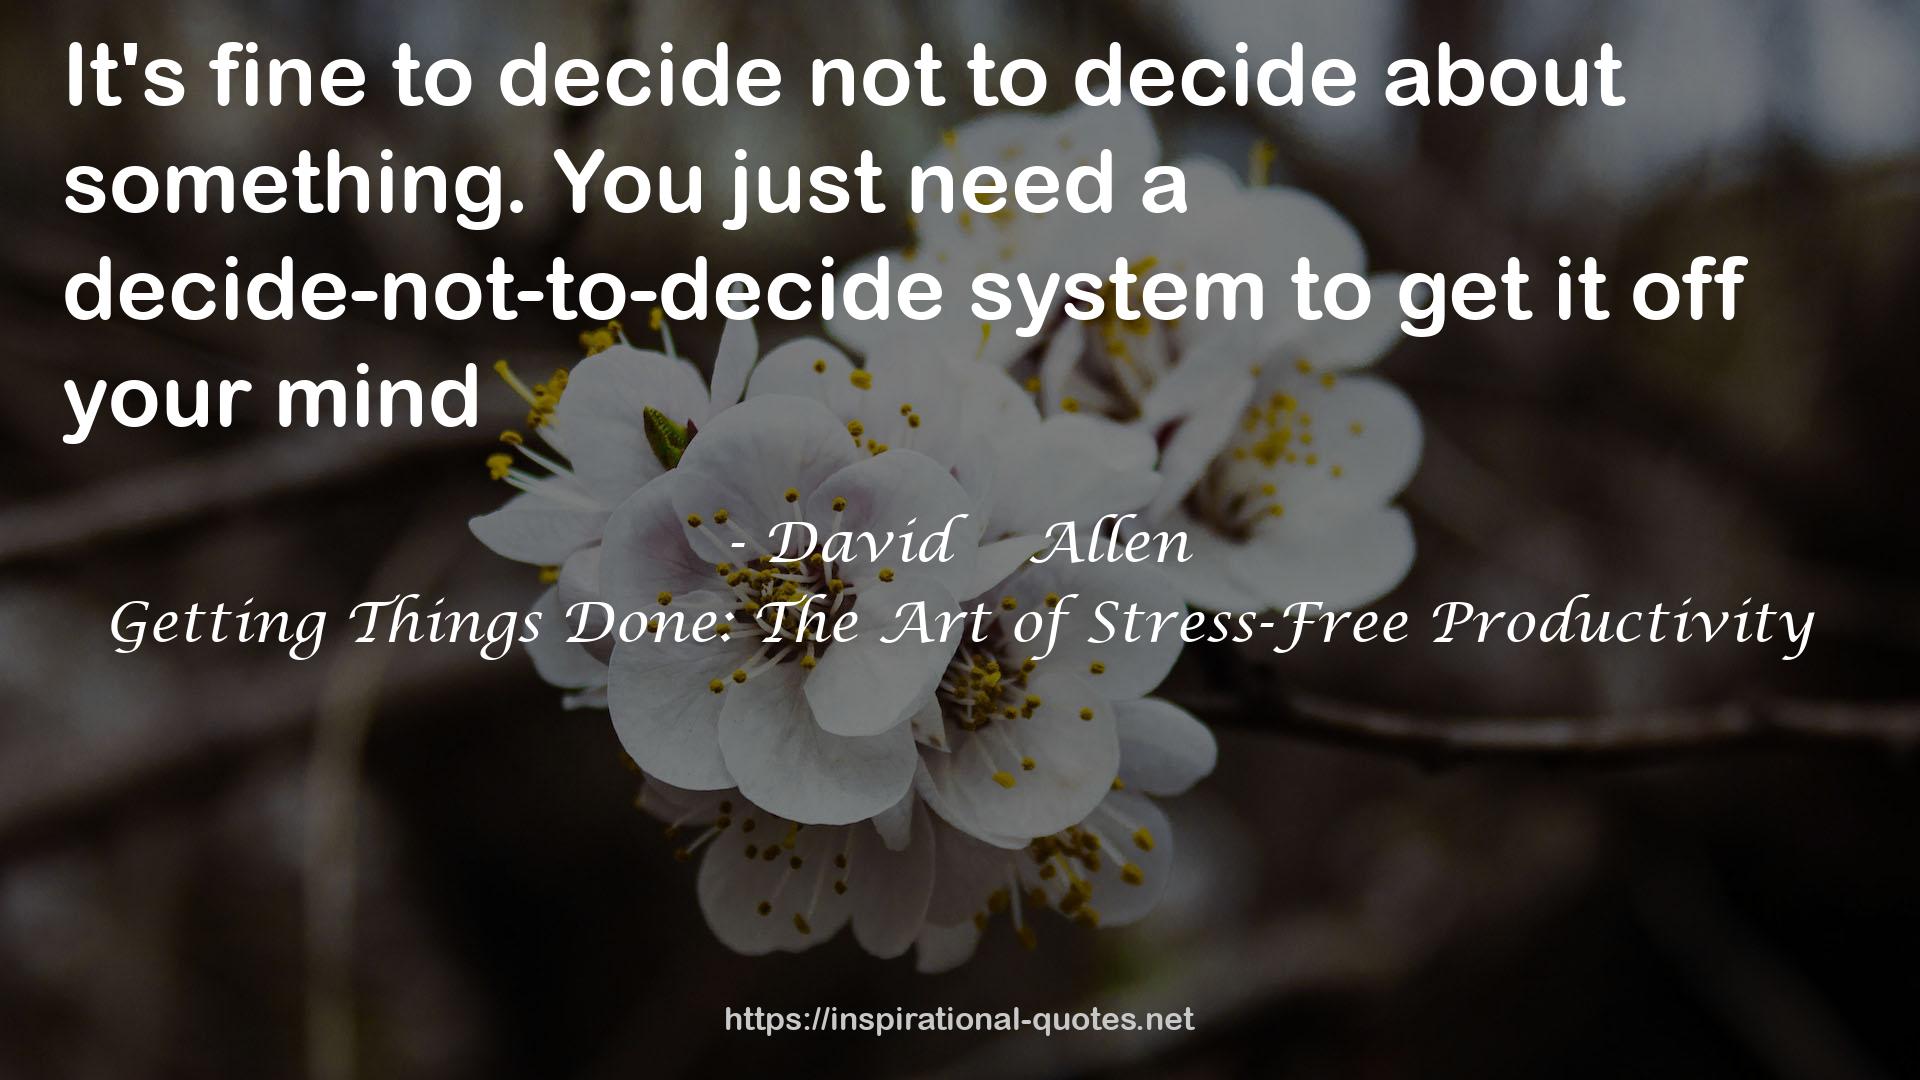 a decide-not-to-decide system  QUOTES